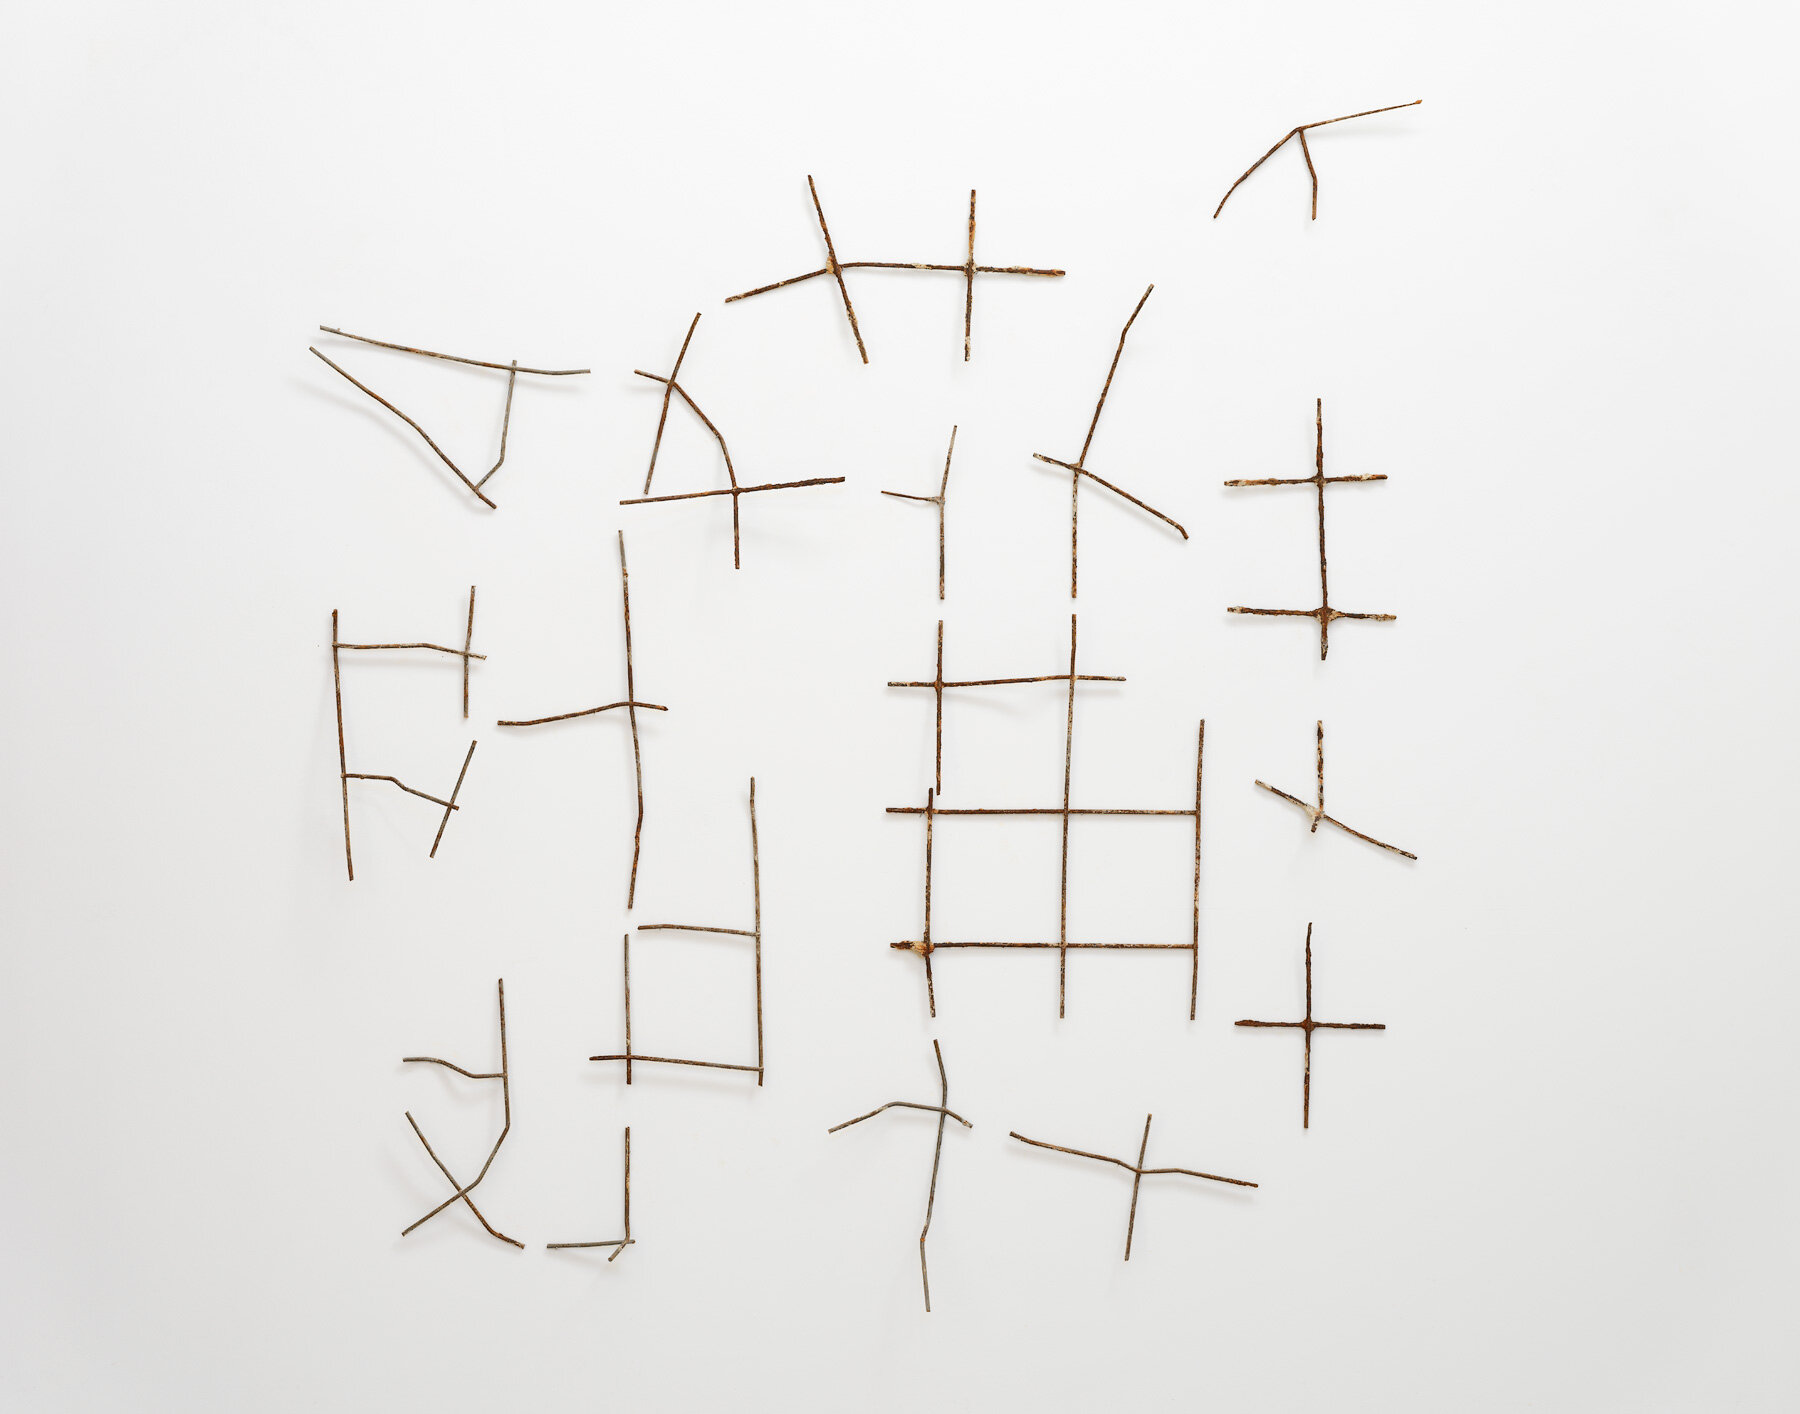   Fractured,  2019  used reinforcing iron mesh  approx 176 x 180 x 16 cm  Photograph Grant Hancock 